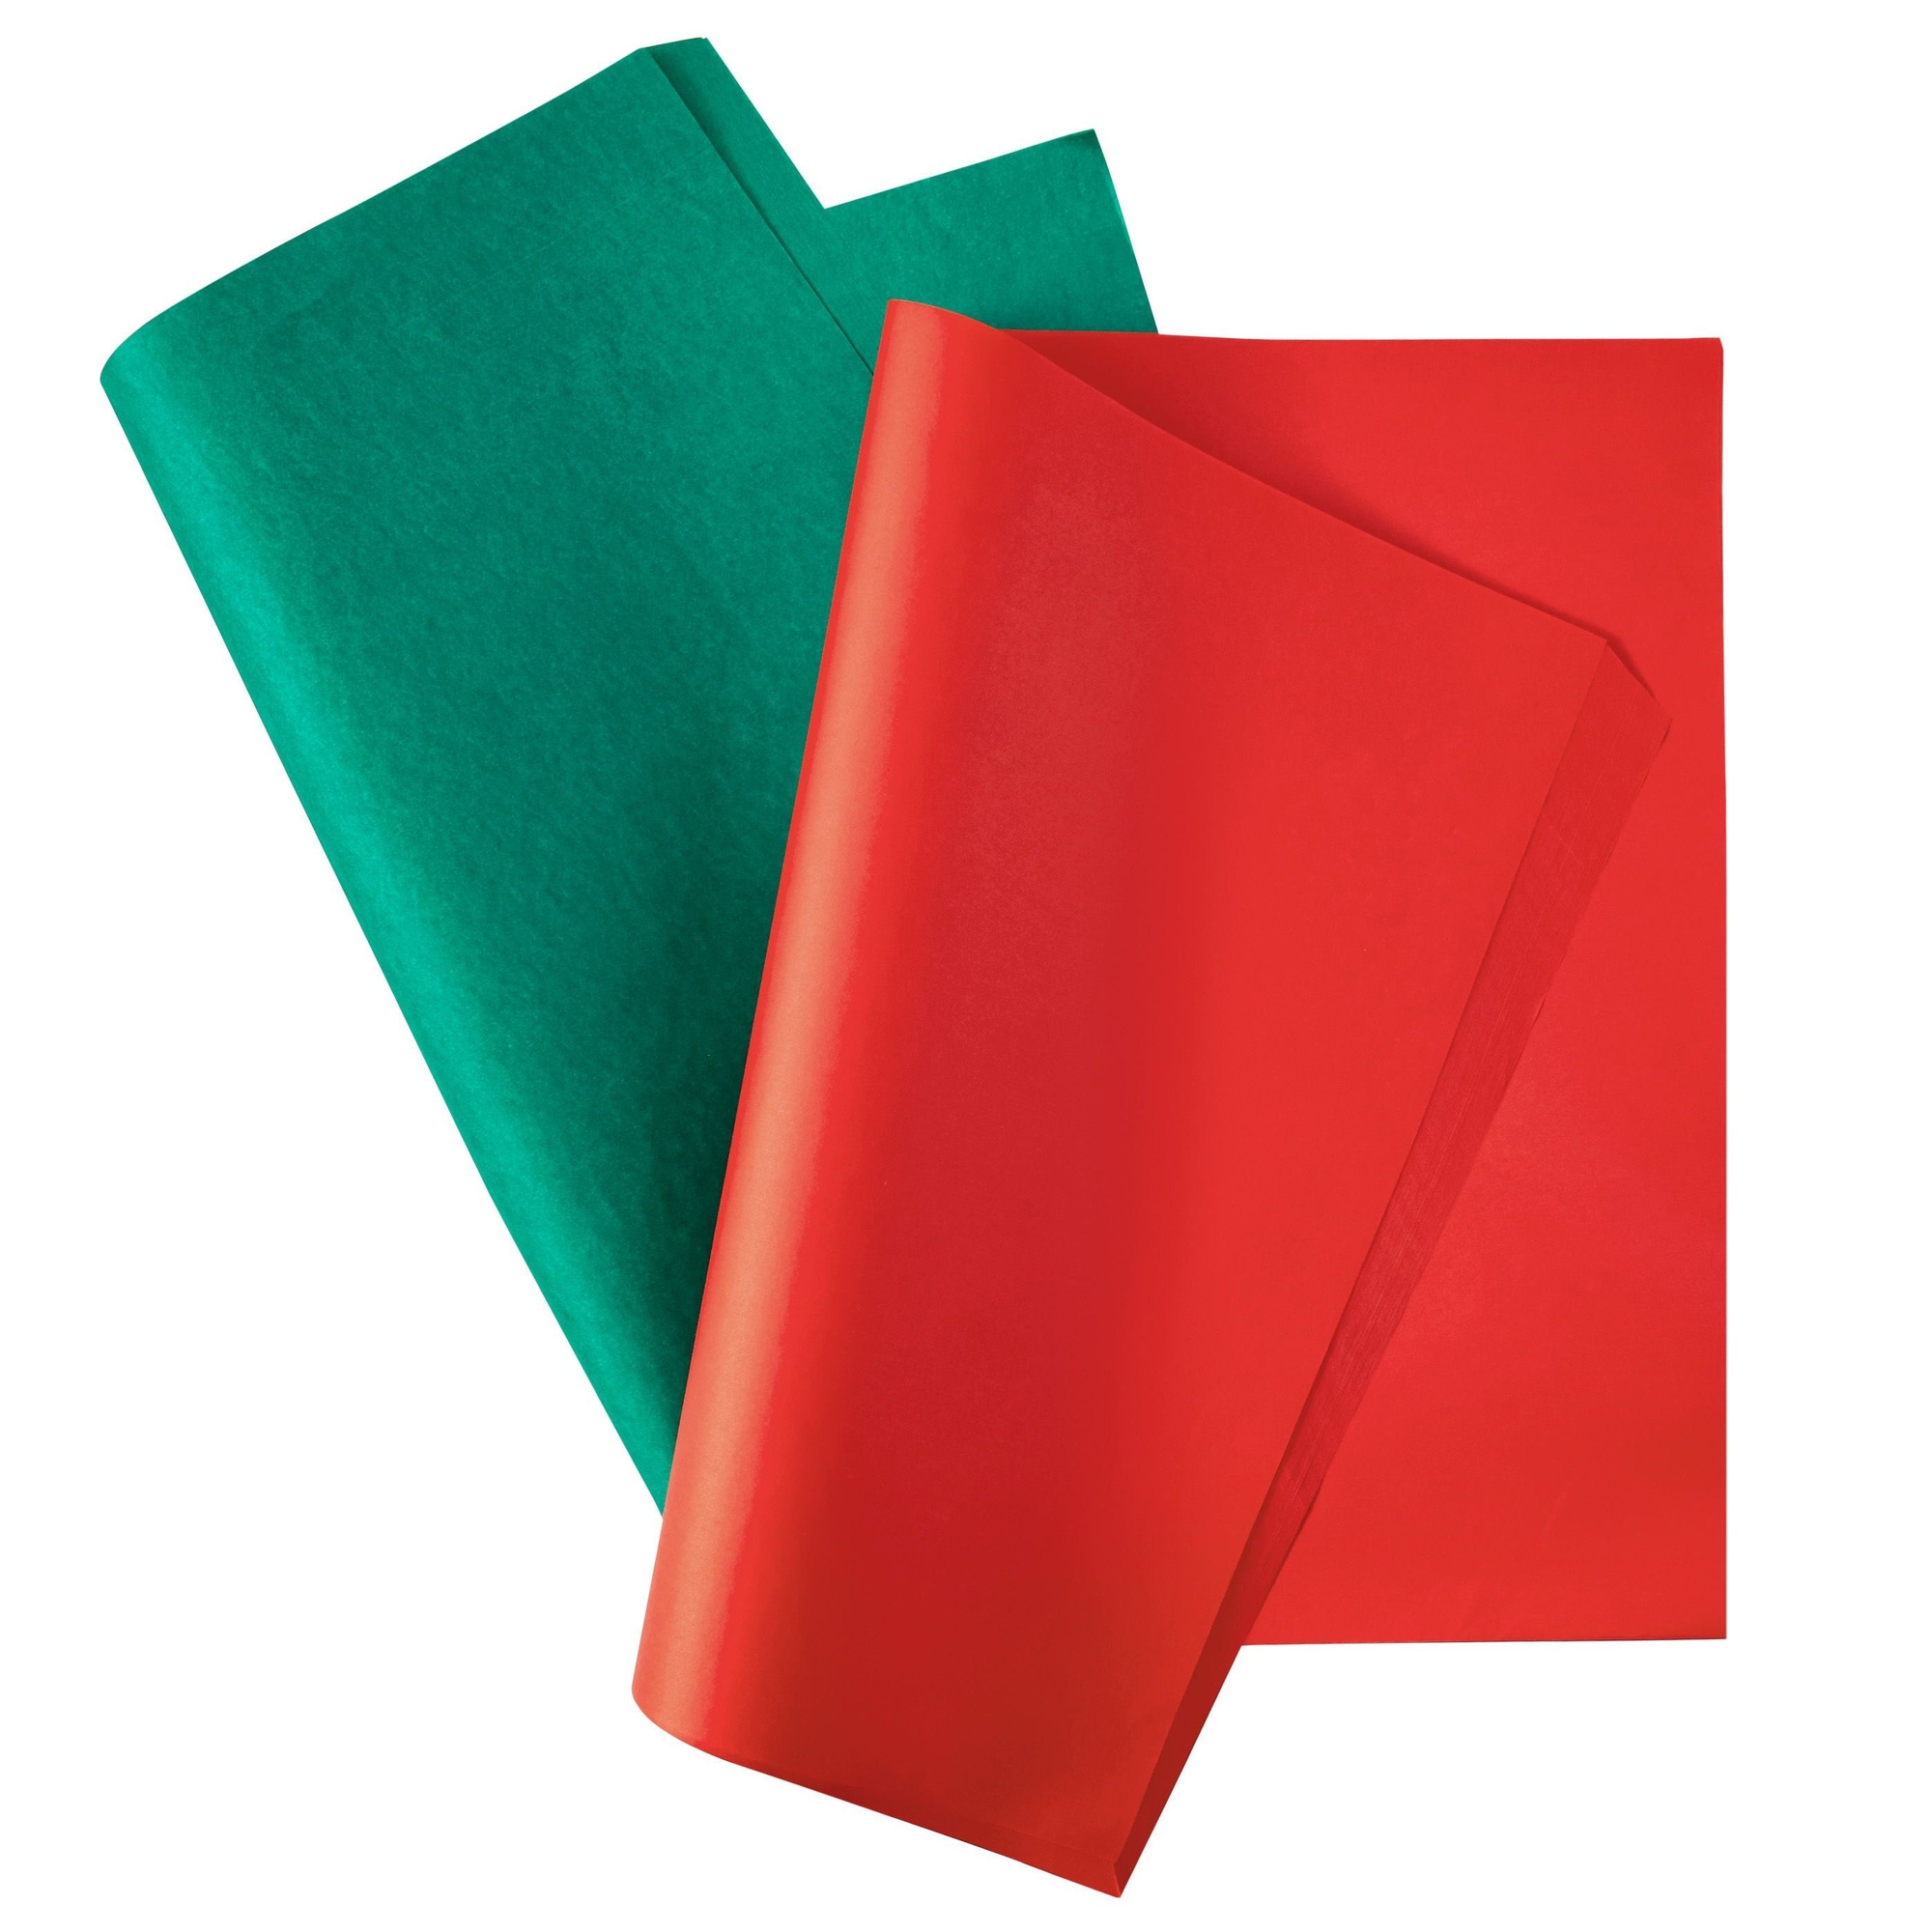 160 Sheets Red and Green Colored Tissue Paper for Gift Wrapping Bags, Bulk  Set for Christmas, Holidays, Art Crafts, 15 x 20 Inches